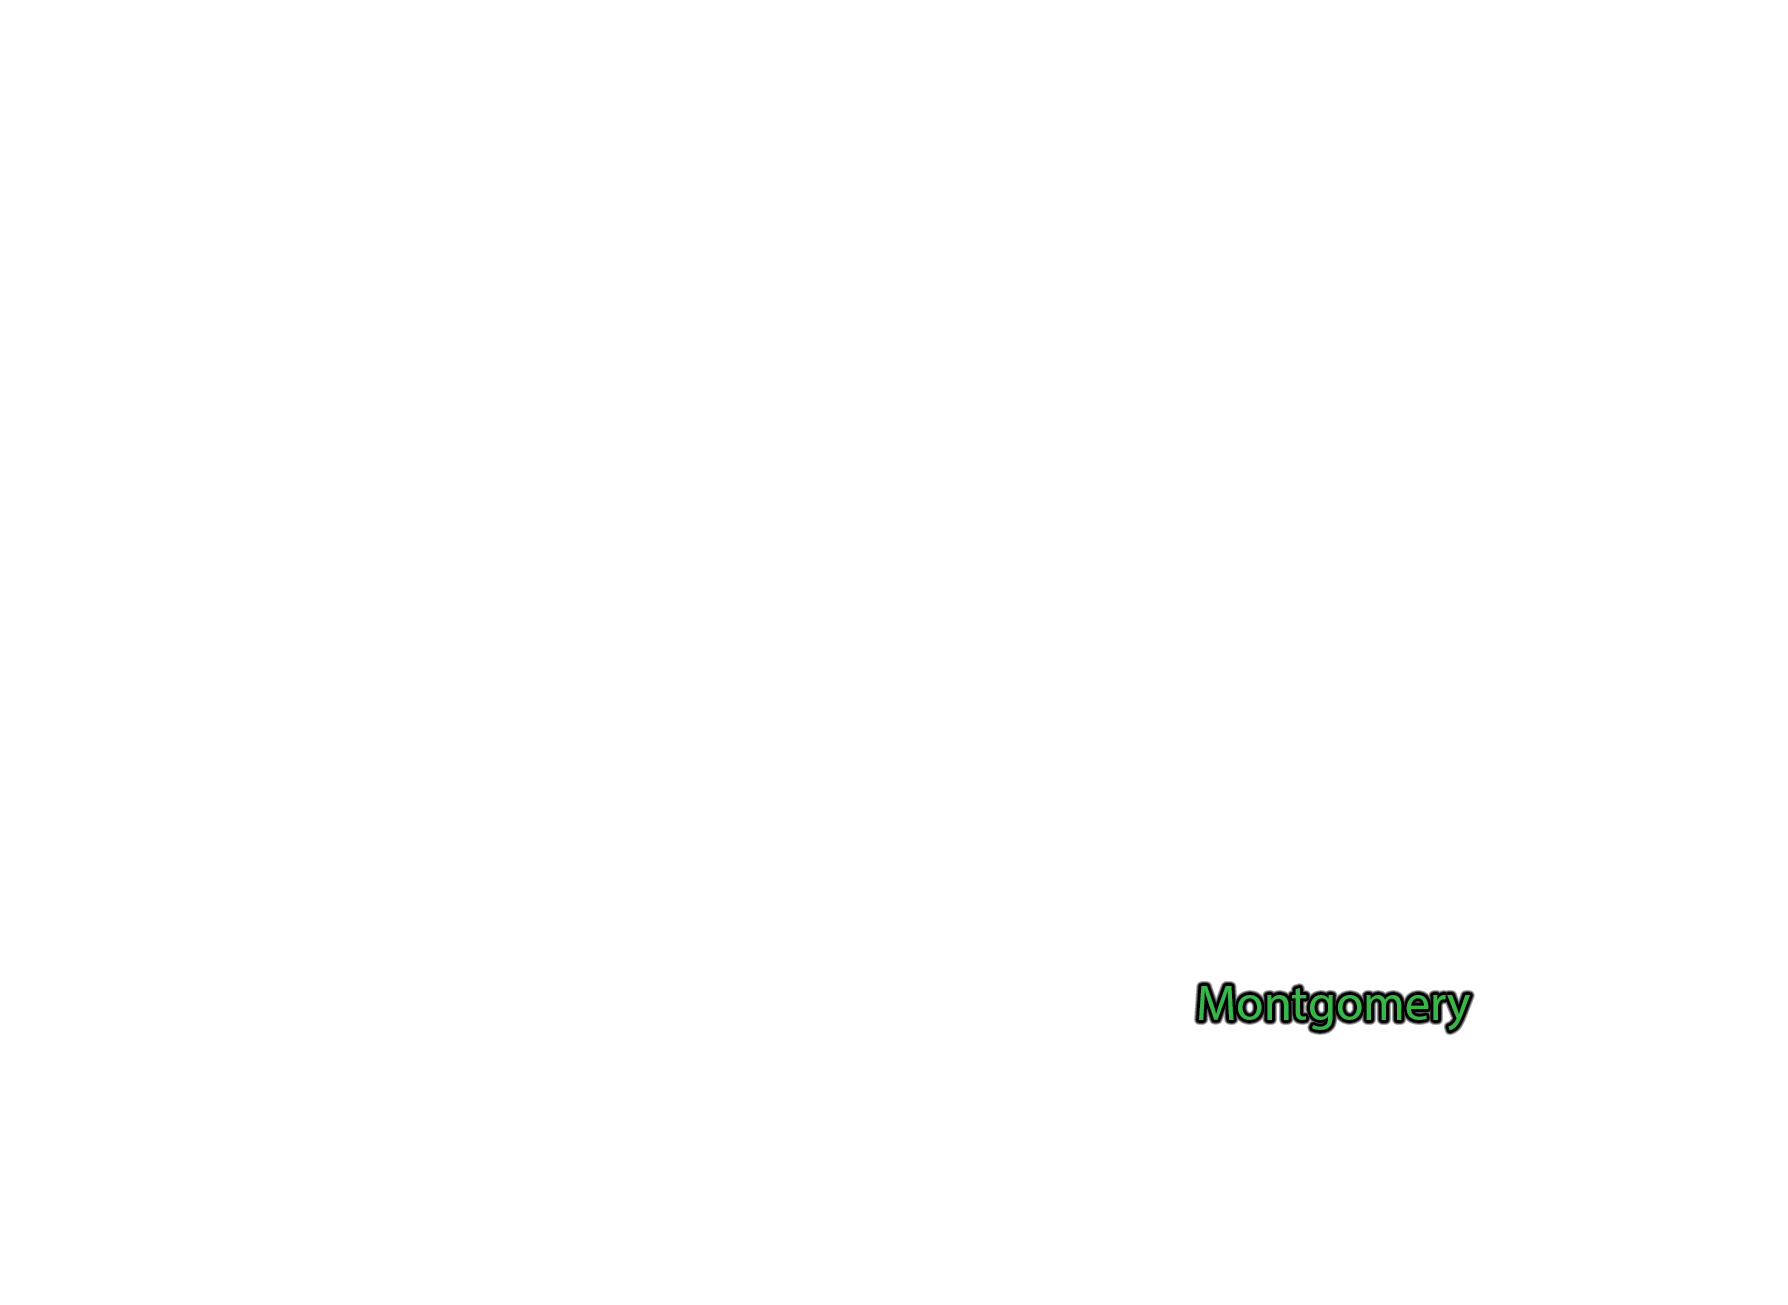 Montgomery label with glow